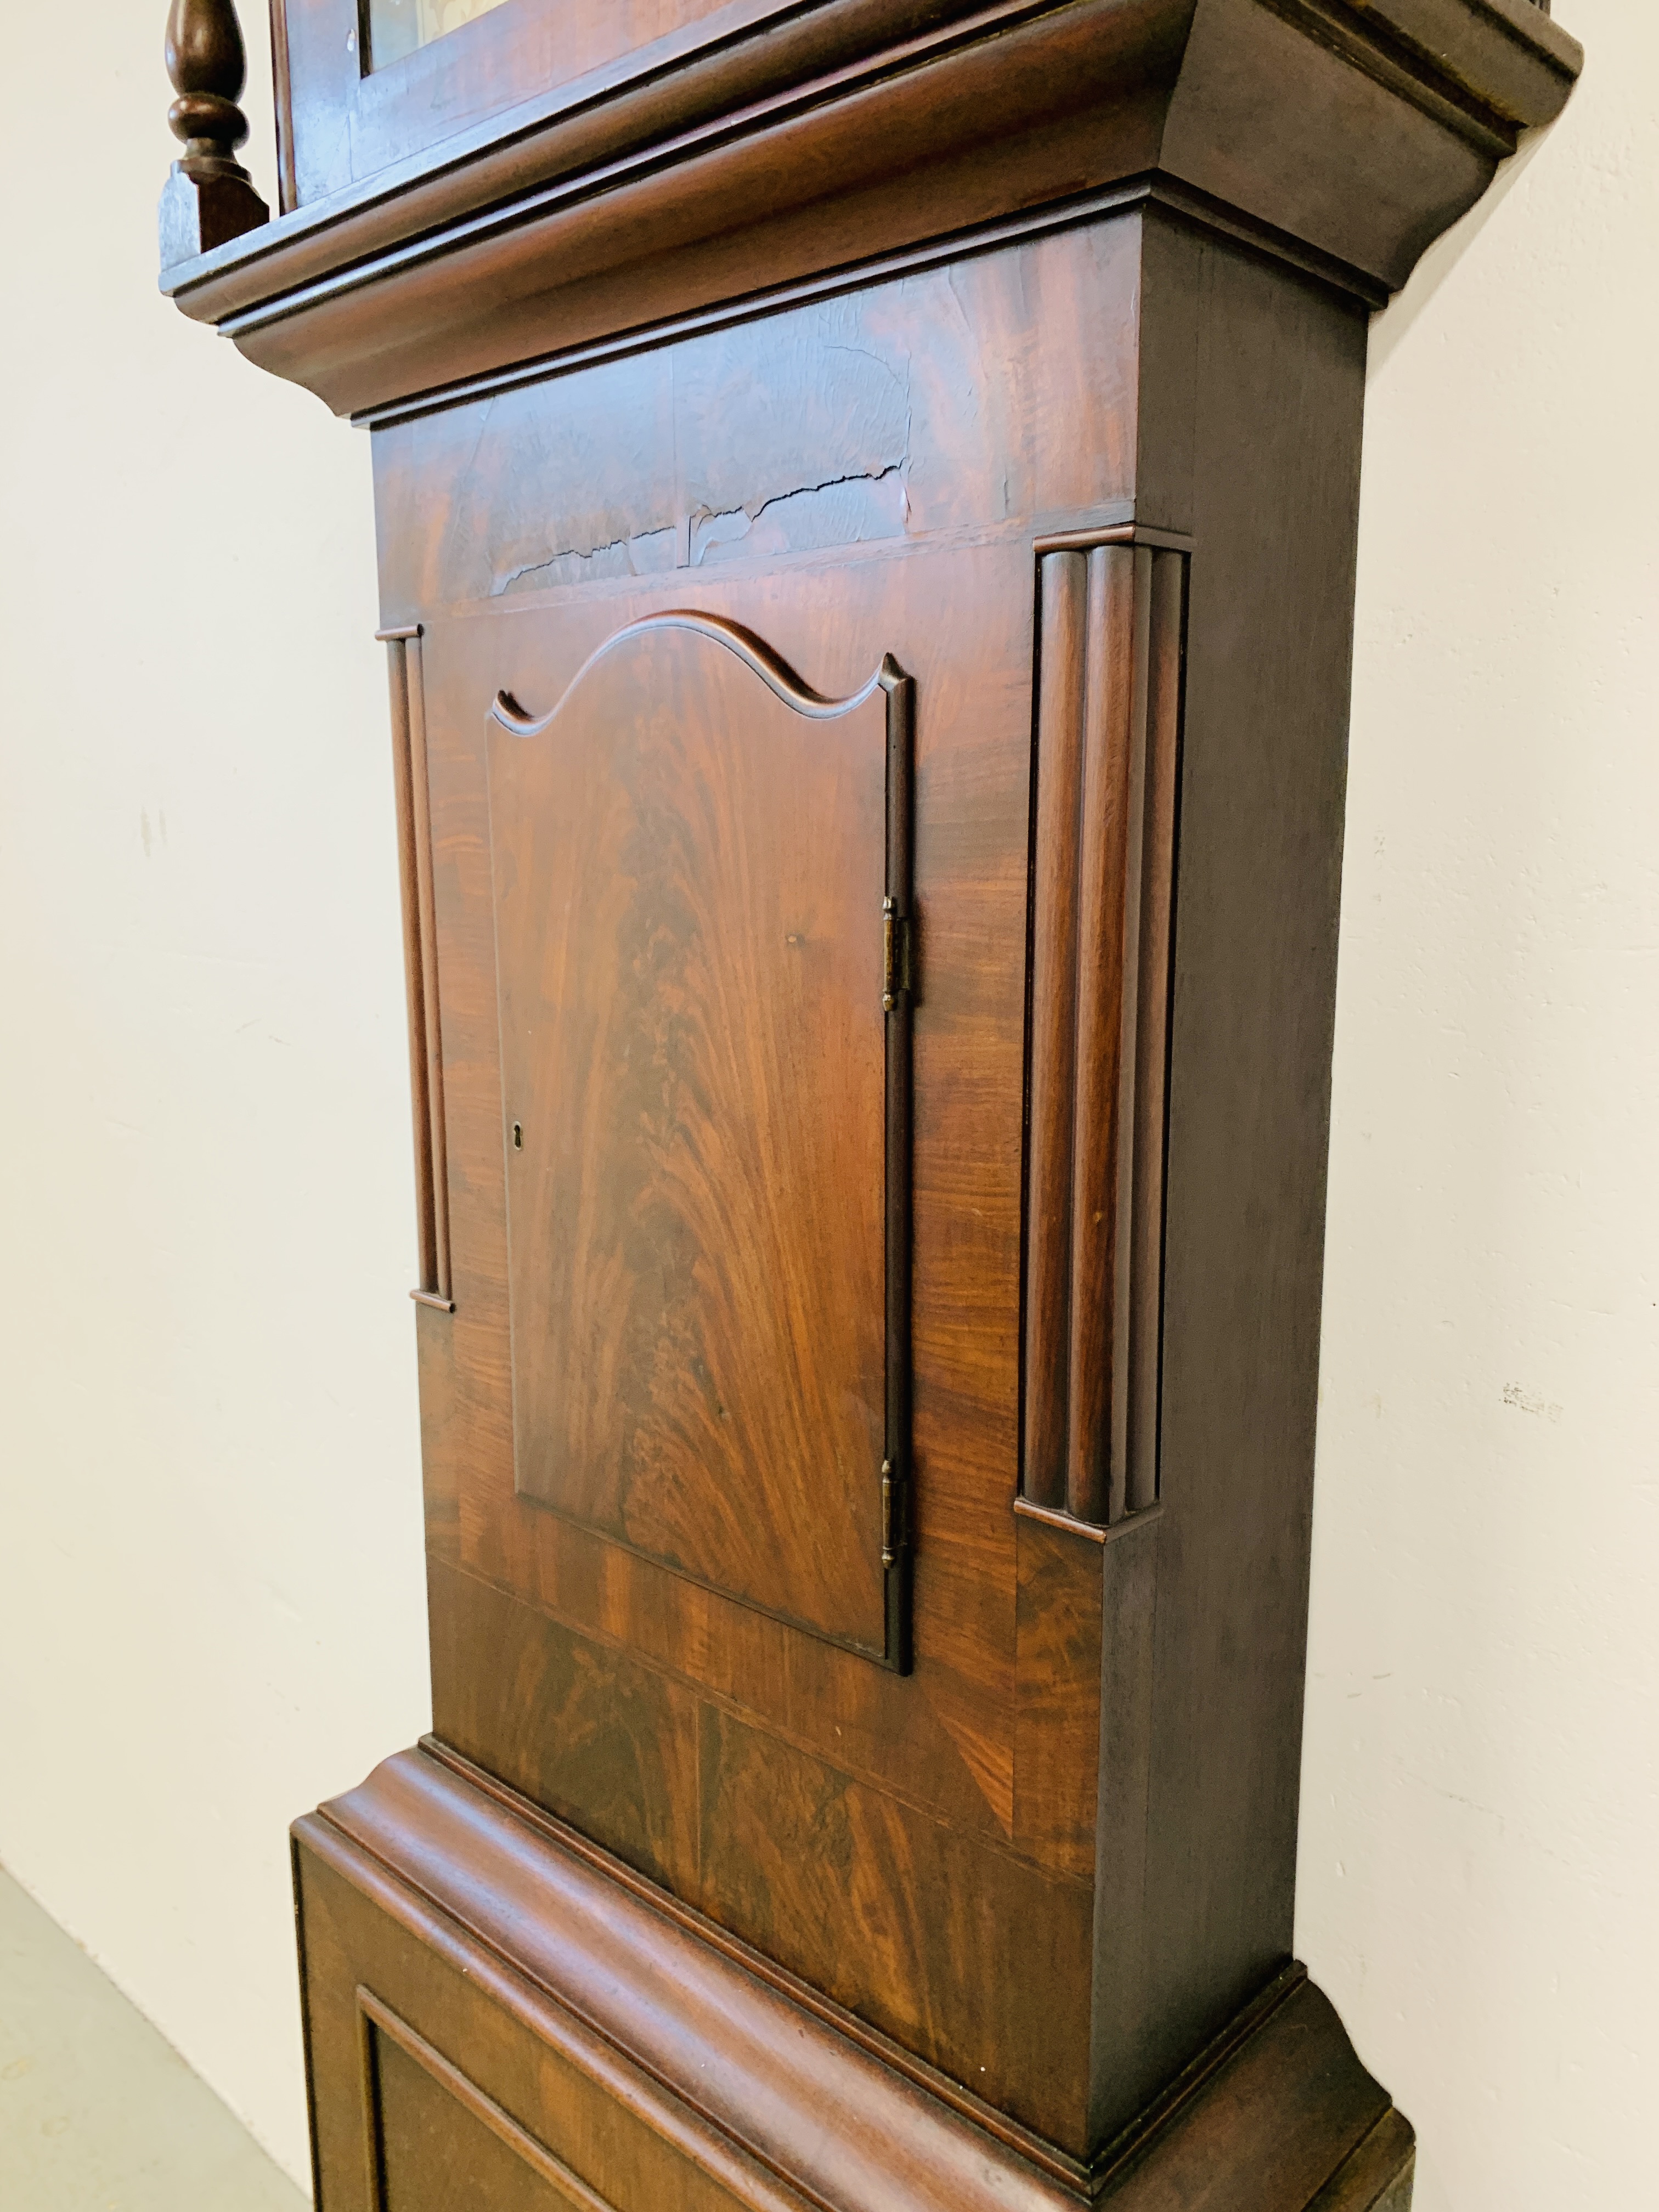 AN ANTIQUE MAHOGANY LONG CASE CLOCK THE HAND PAINTED ARCHED DIAL WITH ROMAN NUMERALS, - Image 5 of 15